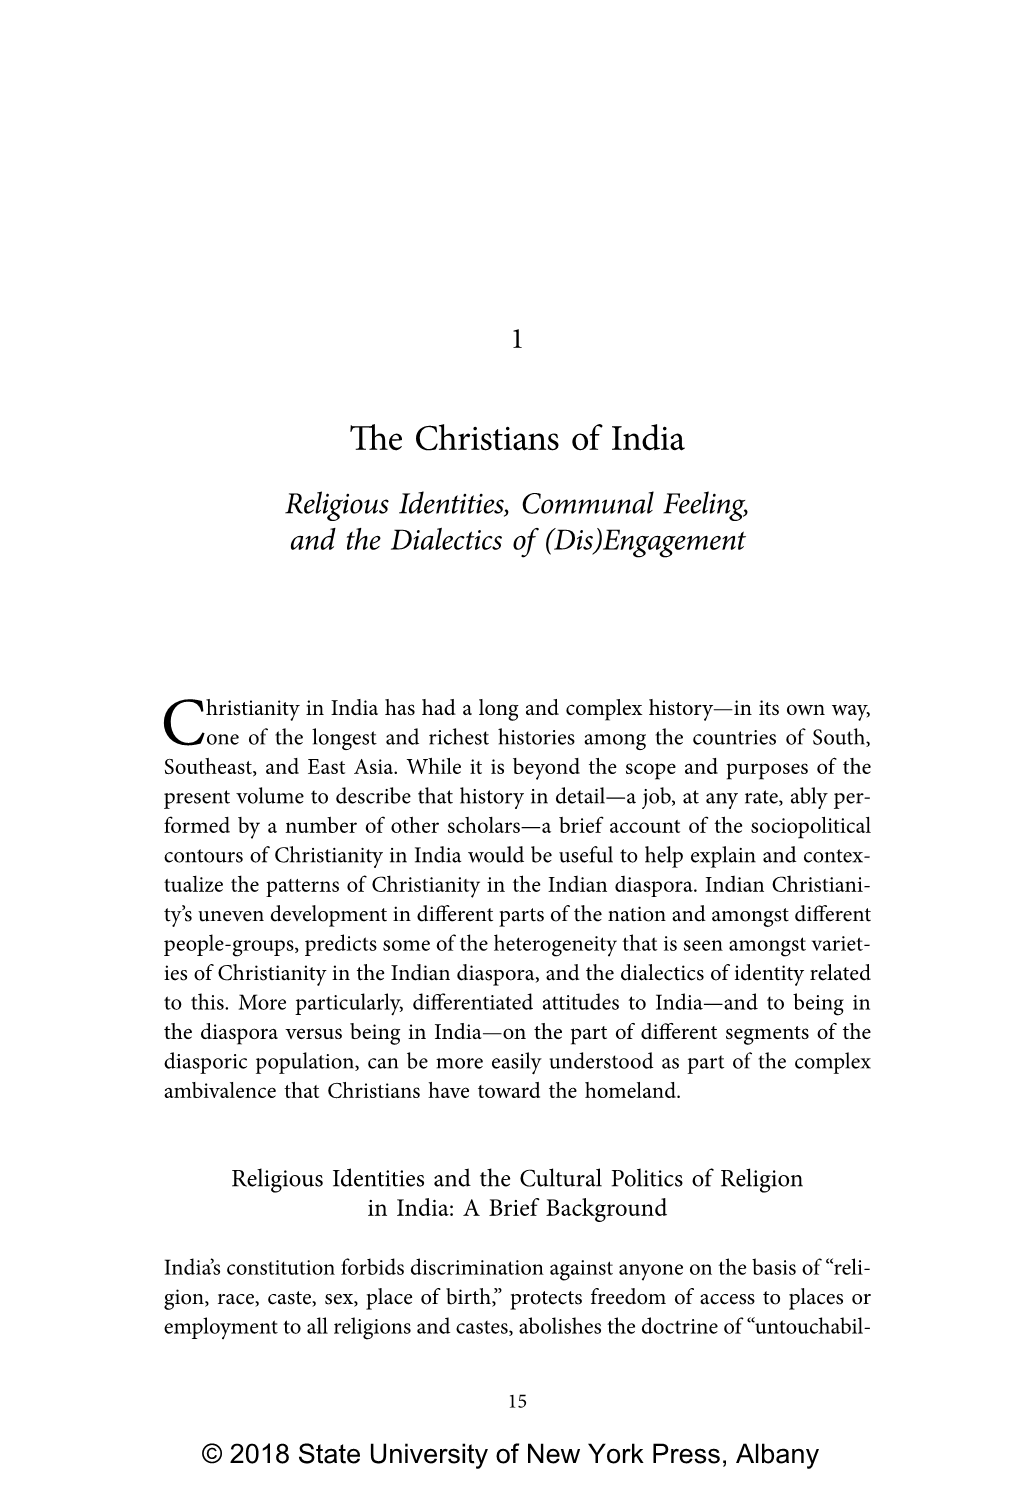 The Christians of India